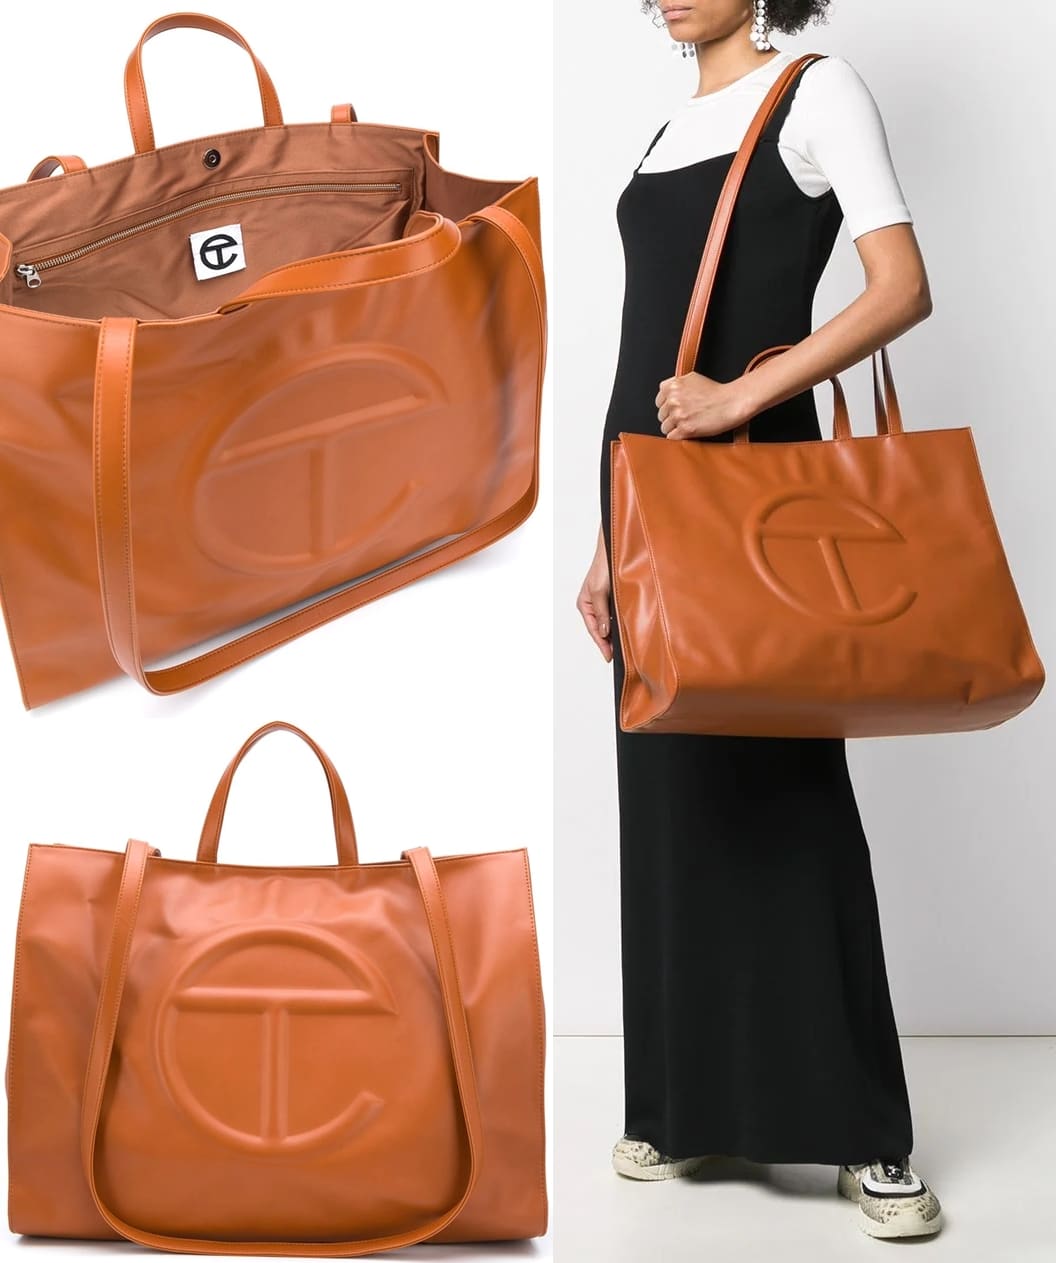 Tan brown leather logo embossed tote bag from Telfar featuring a front embossed logo stamp, a shoulder strap, round top handles, a main internal compartment, an internal zipped pocket and a full lining